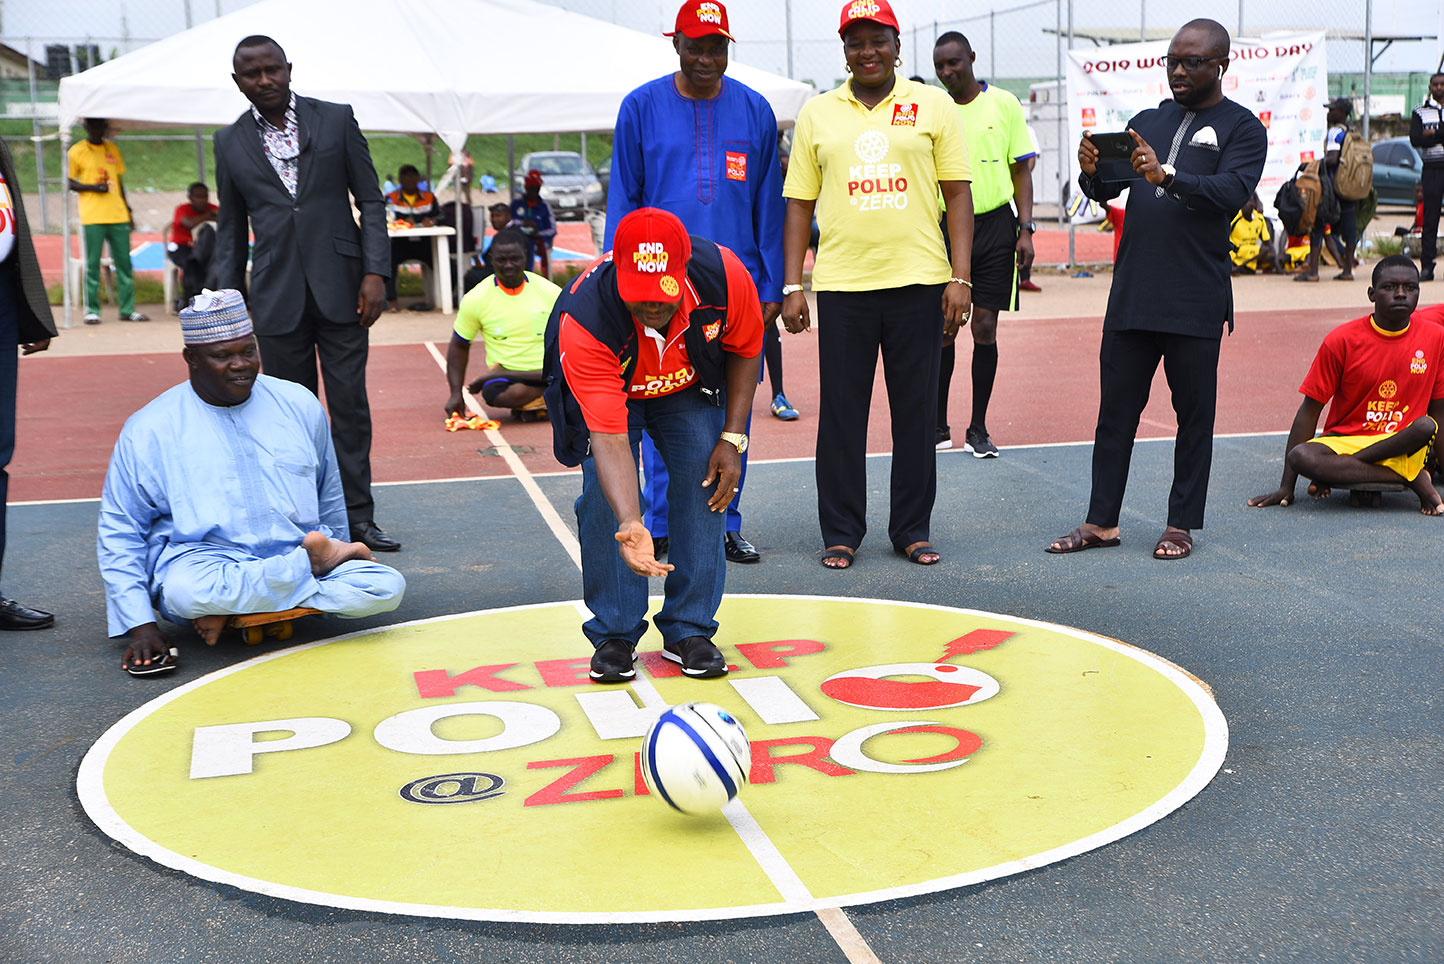 Sir Emeka Offor Foundation Commits to End Polio in the World